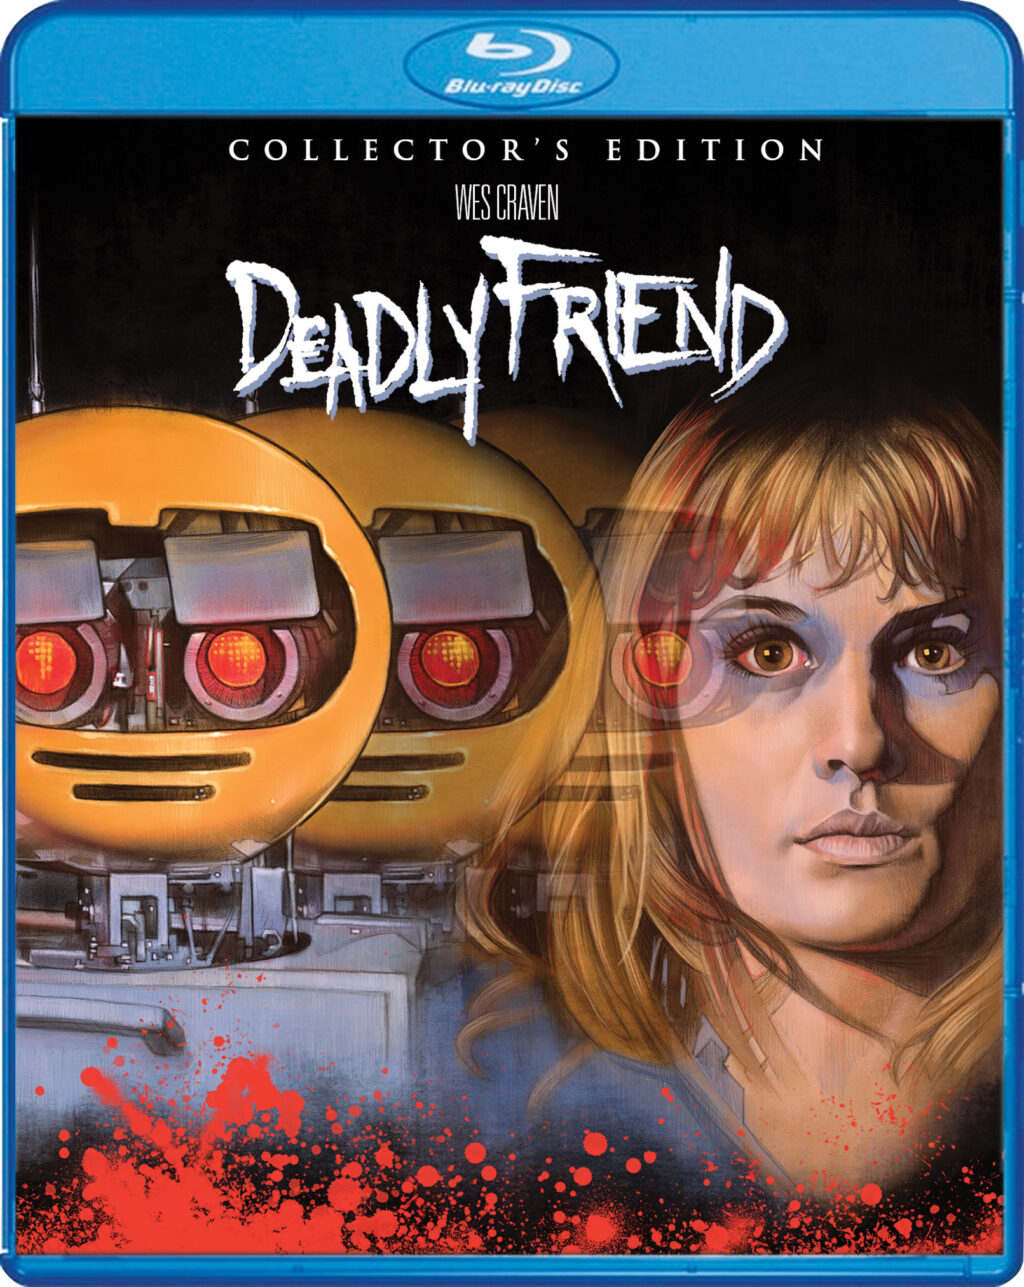 deadly friend blu 1024x1287 - 'Deadly Friend' Blu-ray Review: Not Craven's Best... And Maybe His Worst